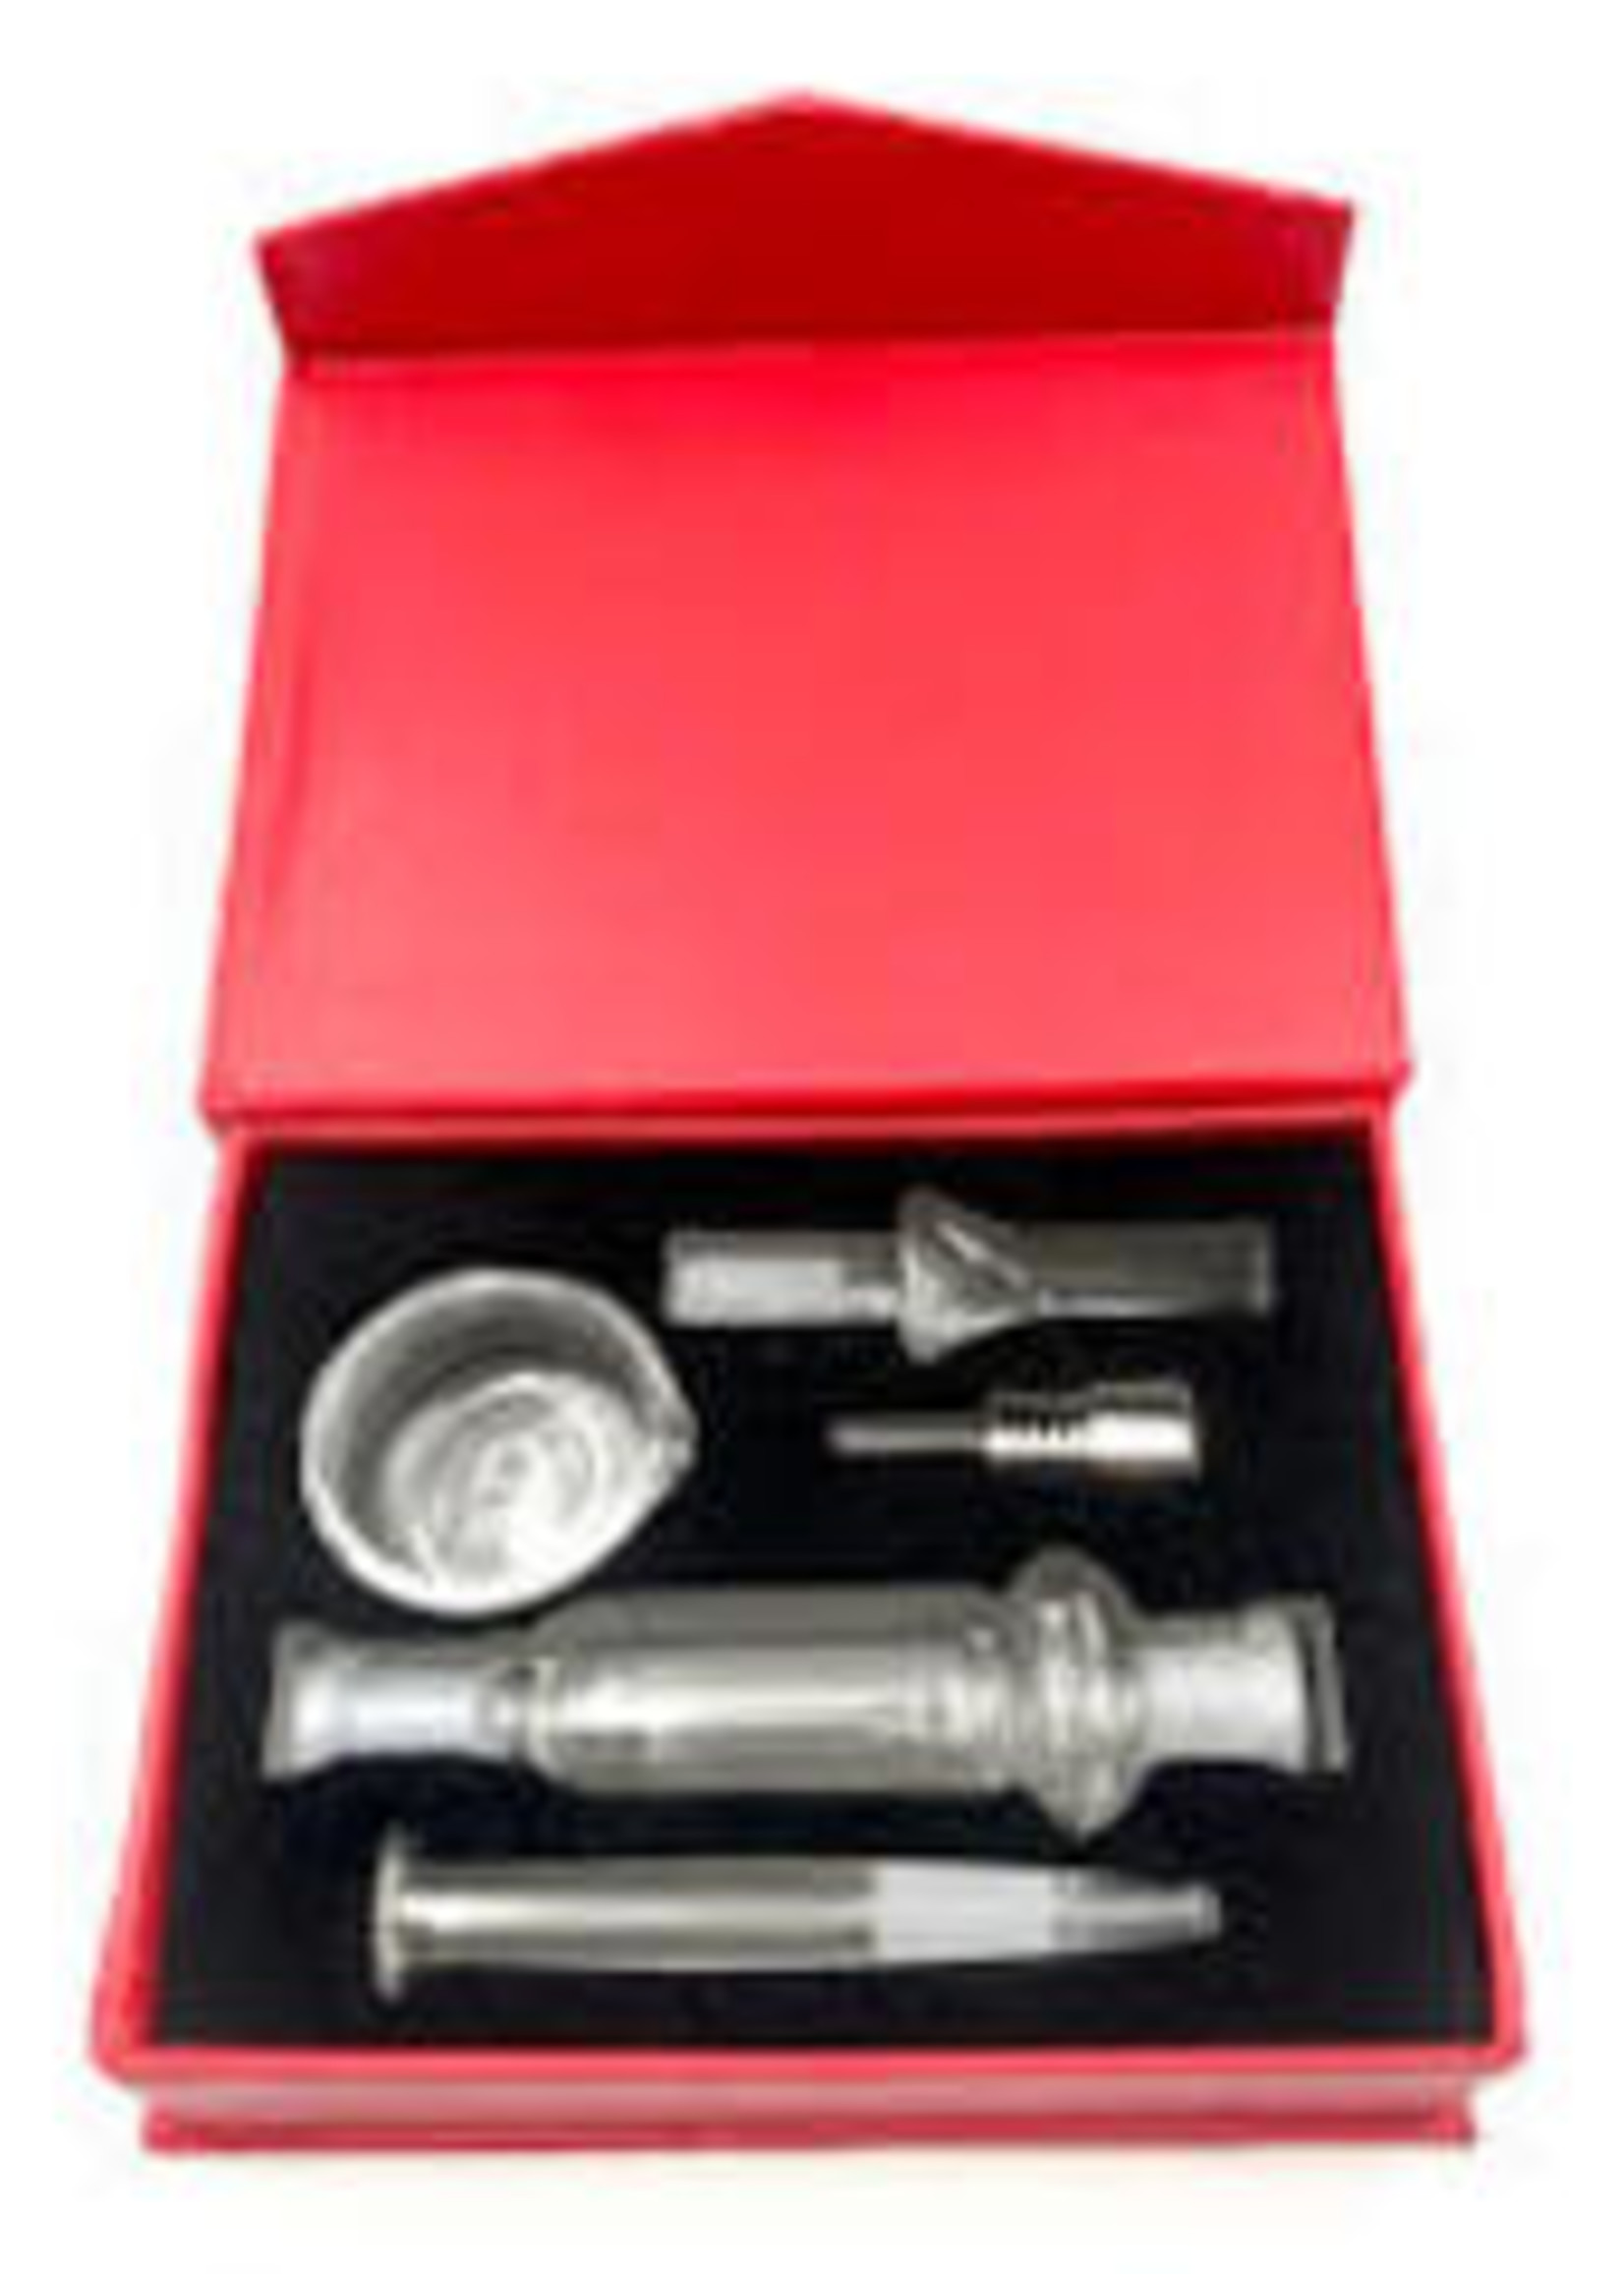 Nectar Collector 19mm Kit - #2587